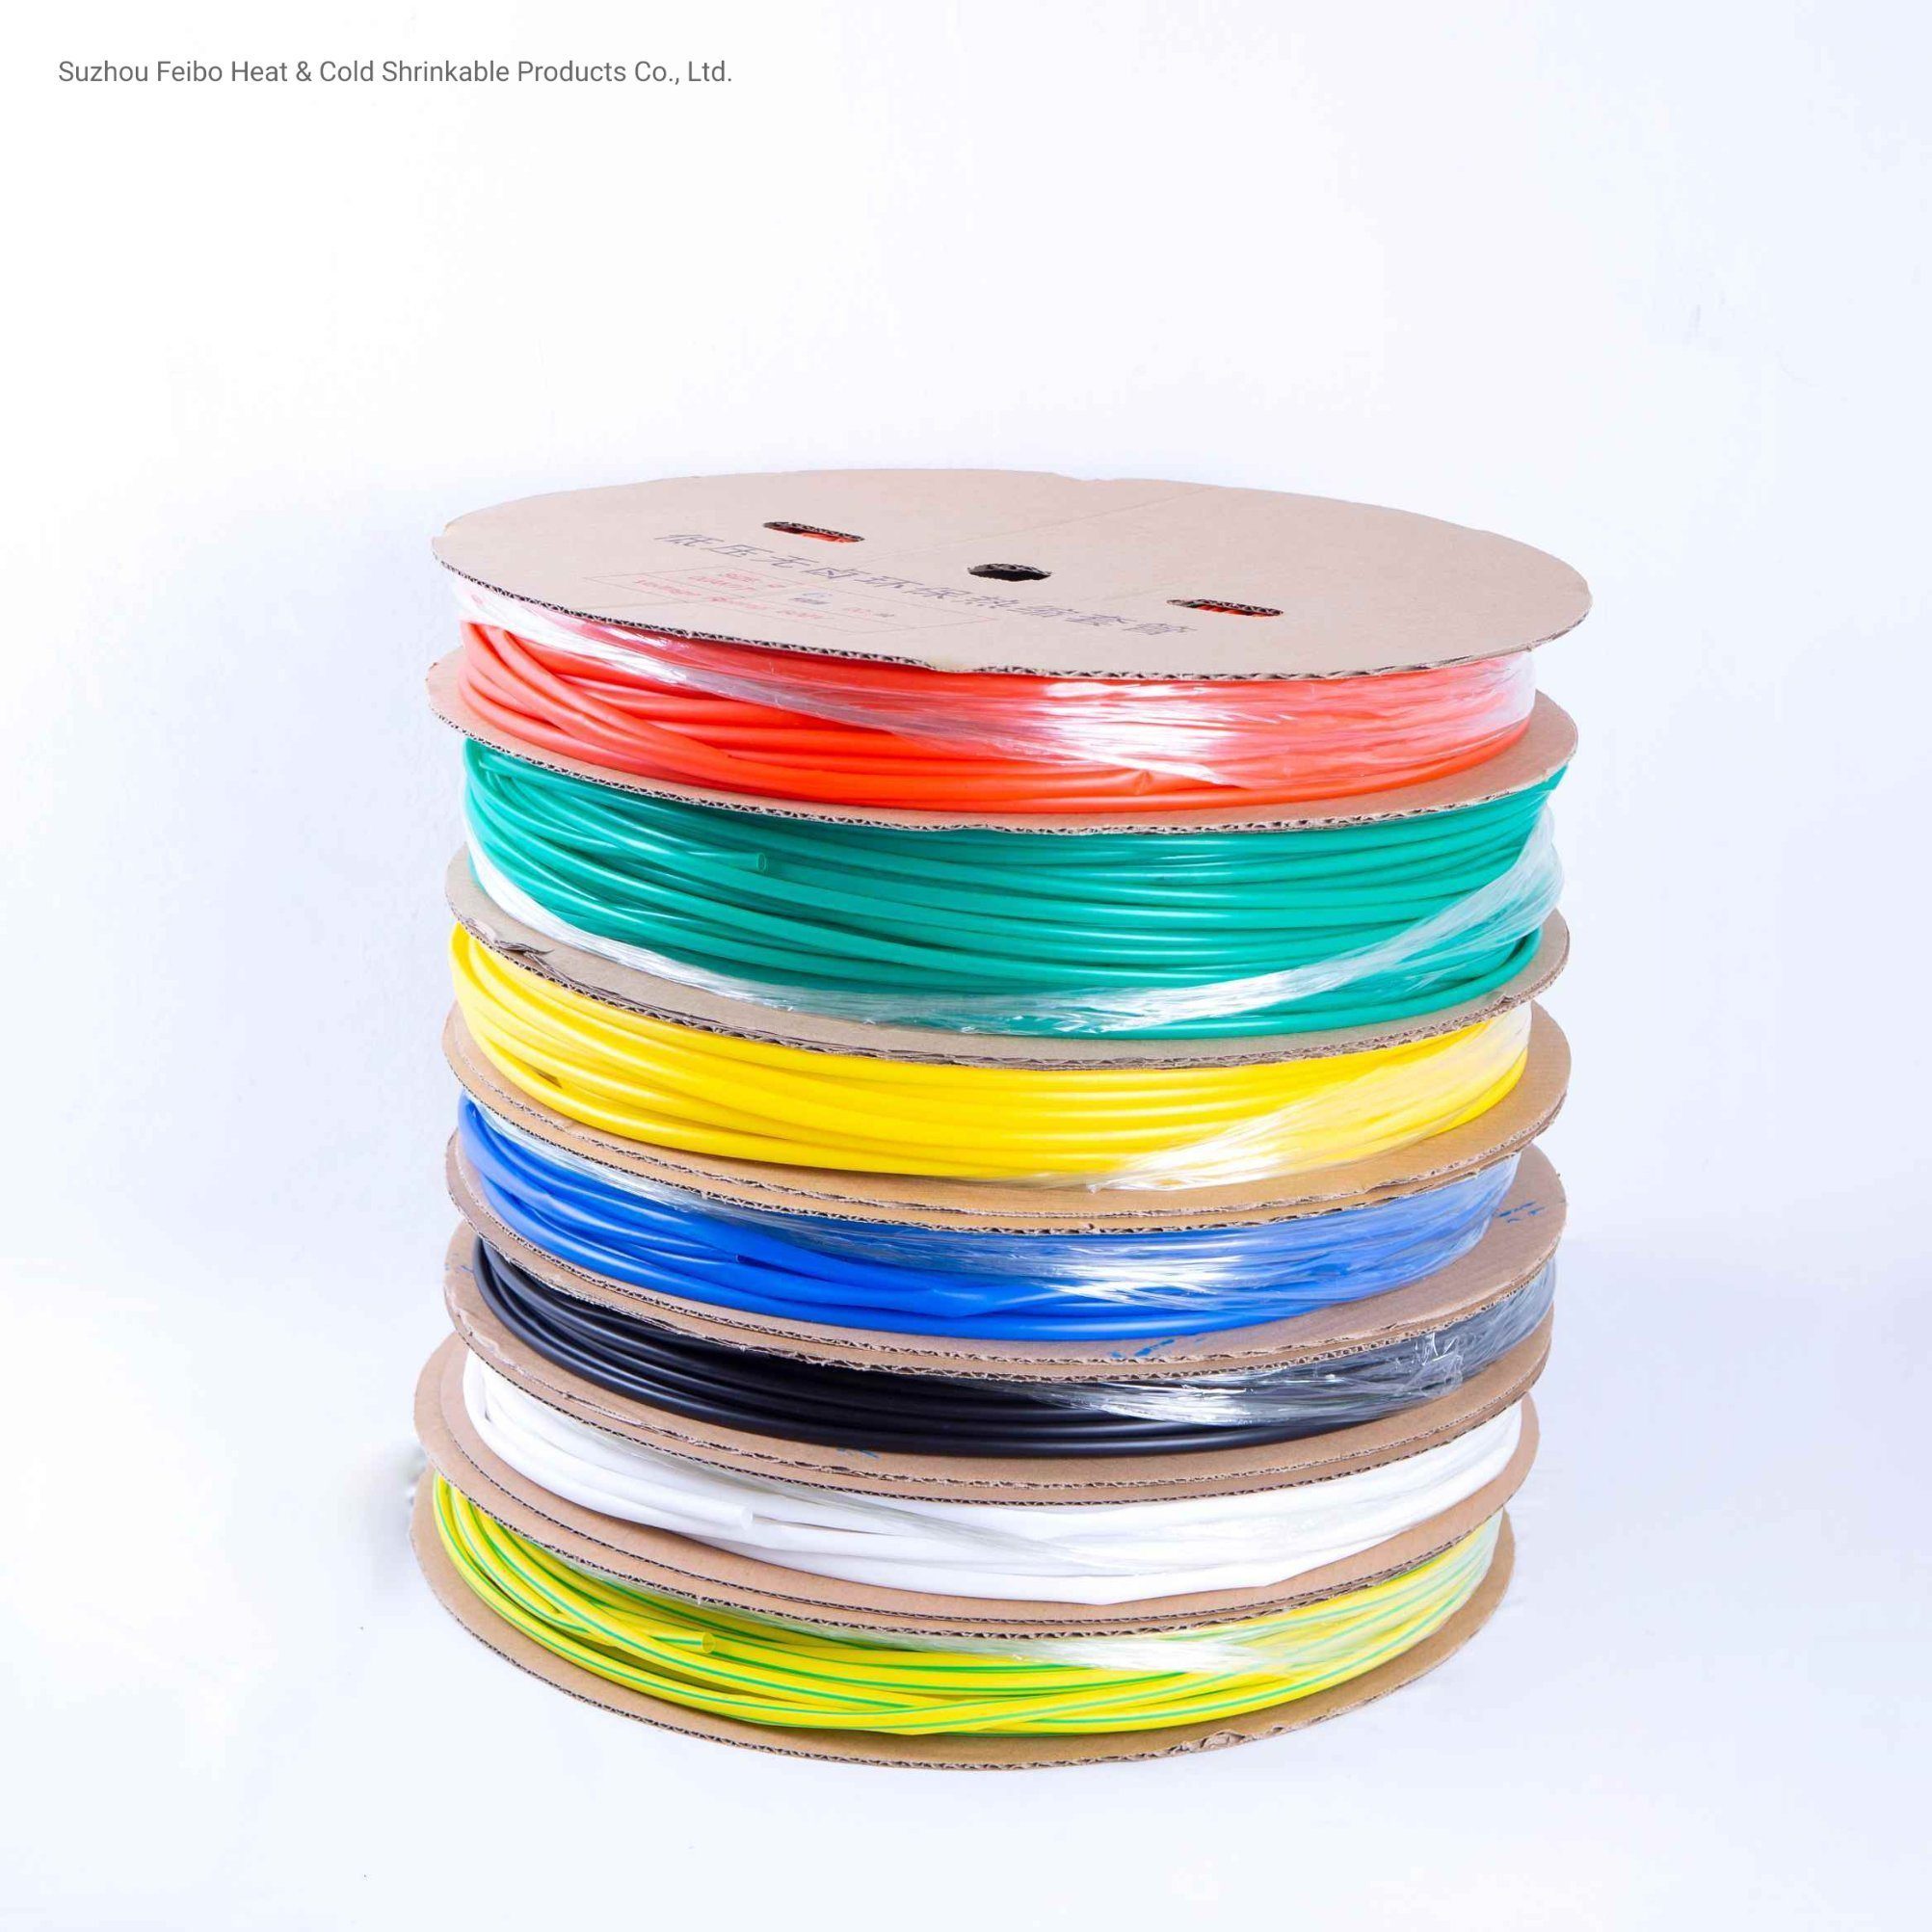 Szfb Color Low Pressure Heat Shrink Sleeve Specification 3-200 Eco-Friendly Heat Shrink Tube